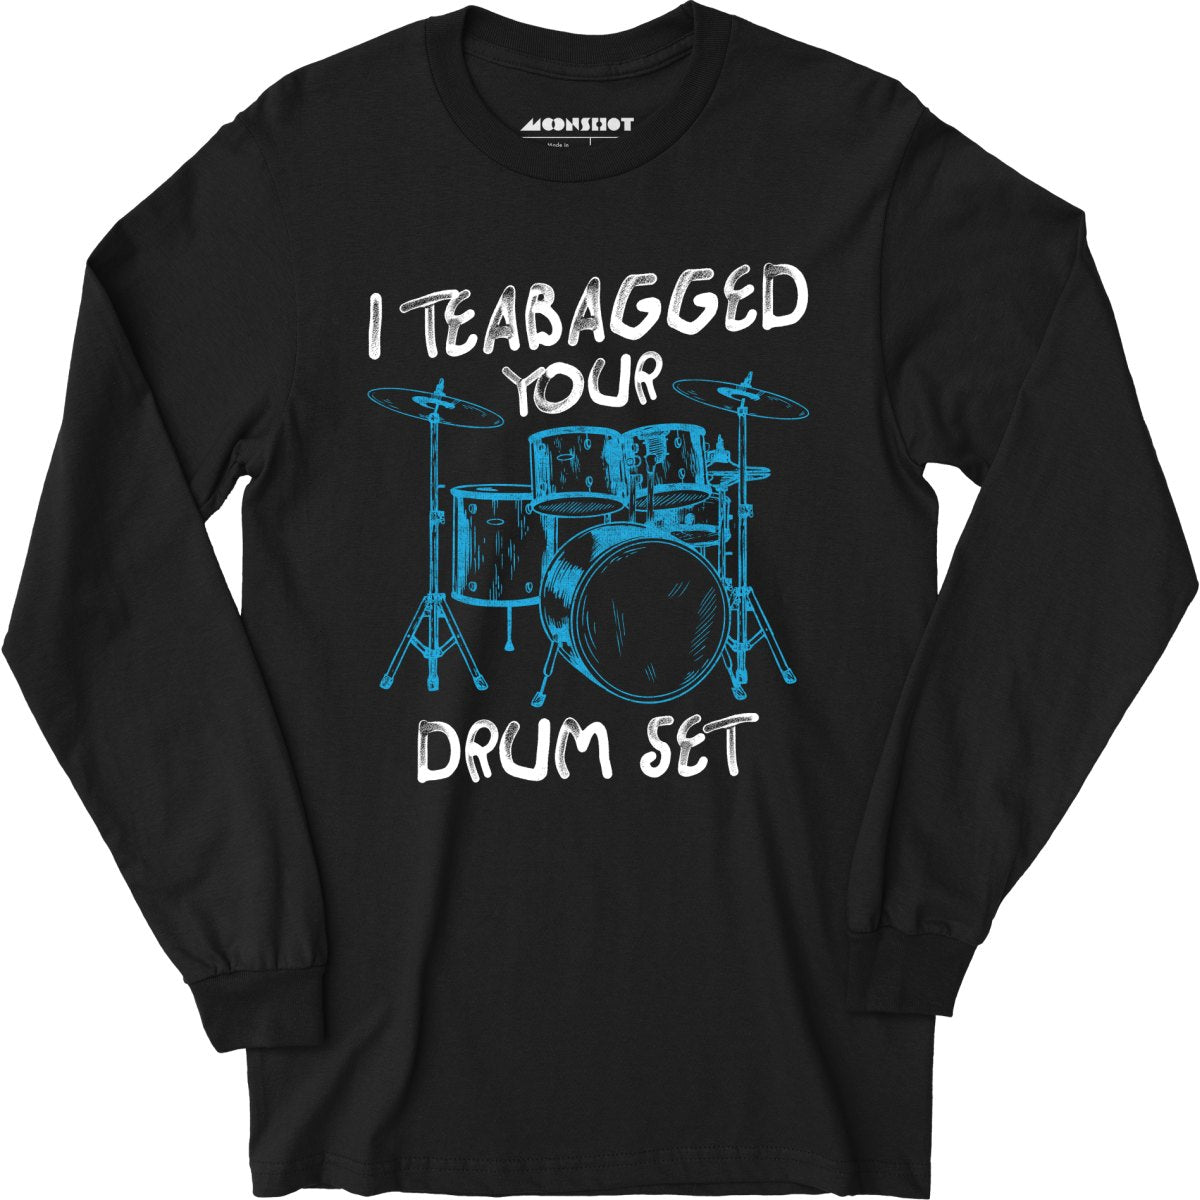 I Teabagged Your Drum Set - Long Sleeve T-Shirt